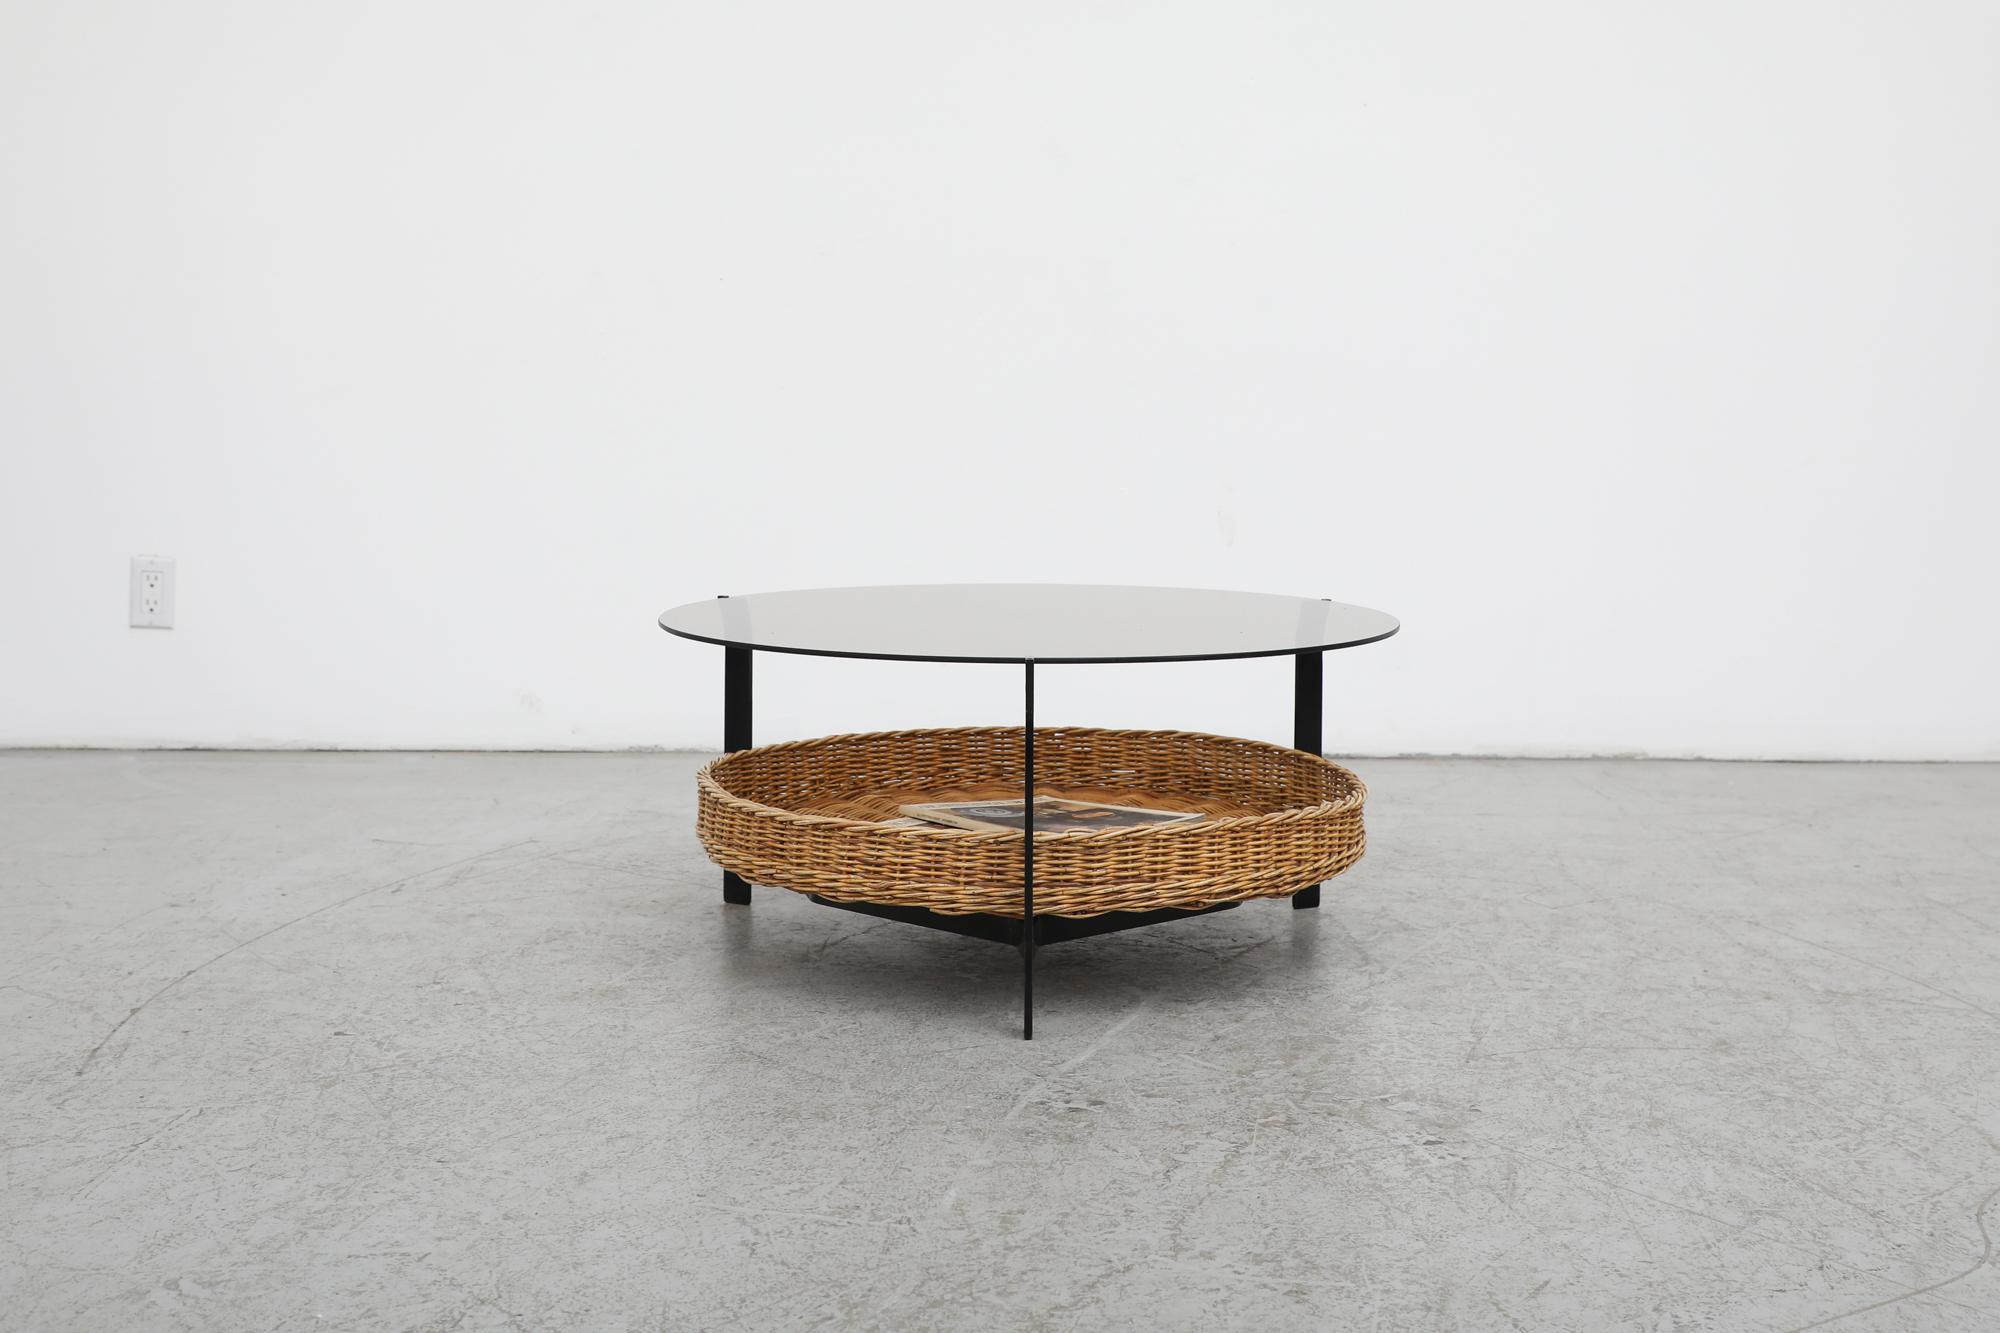 Dutch Mid-Century Modernist Coffee Table with Smoked Glass and Rattan Basket For Sale